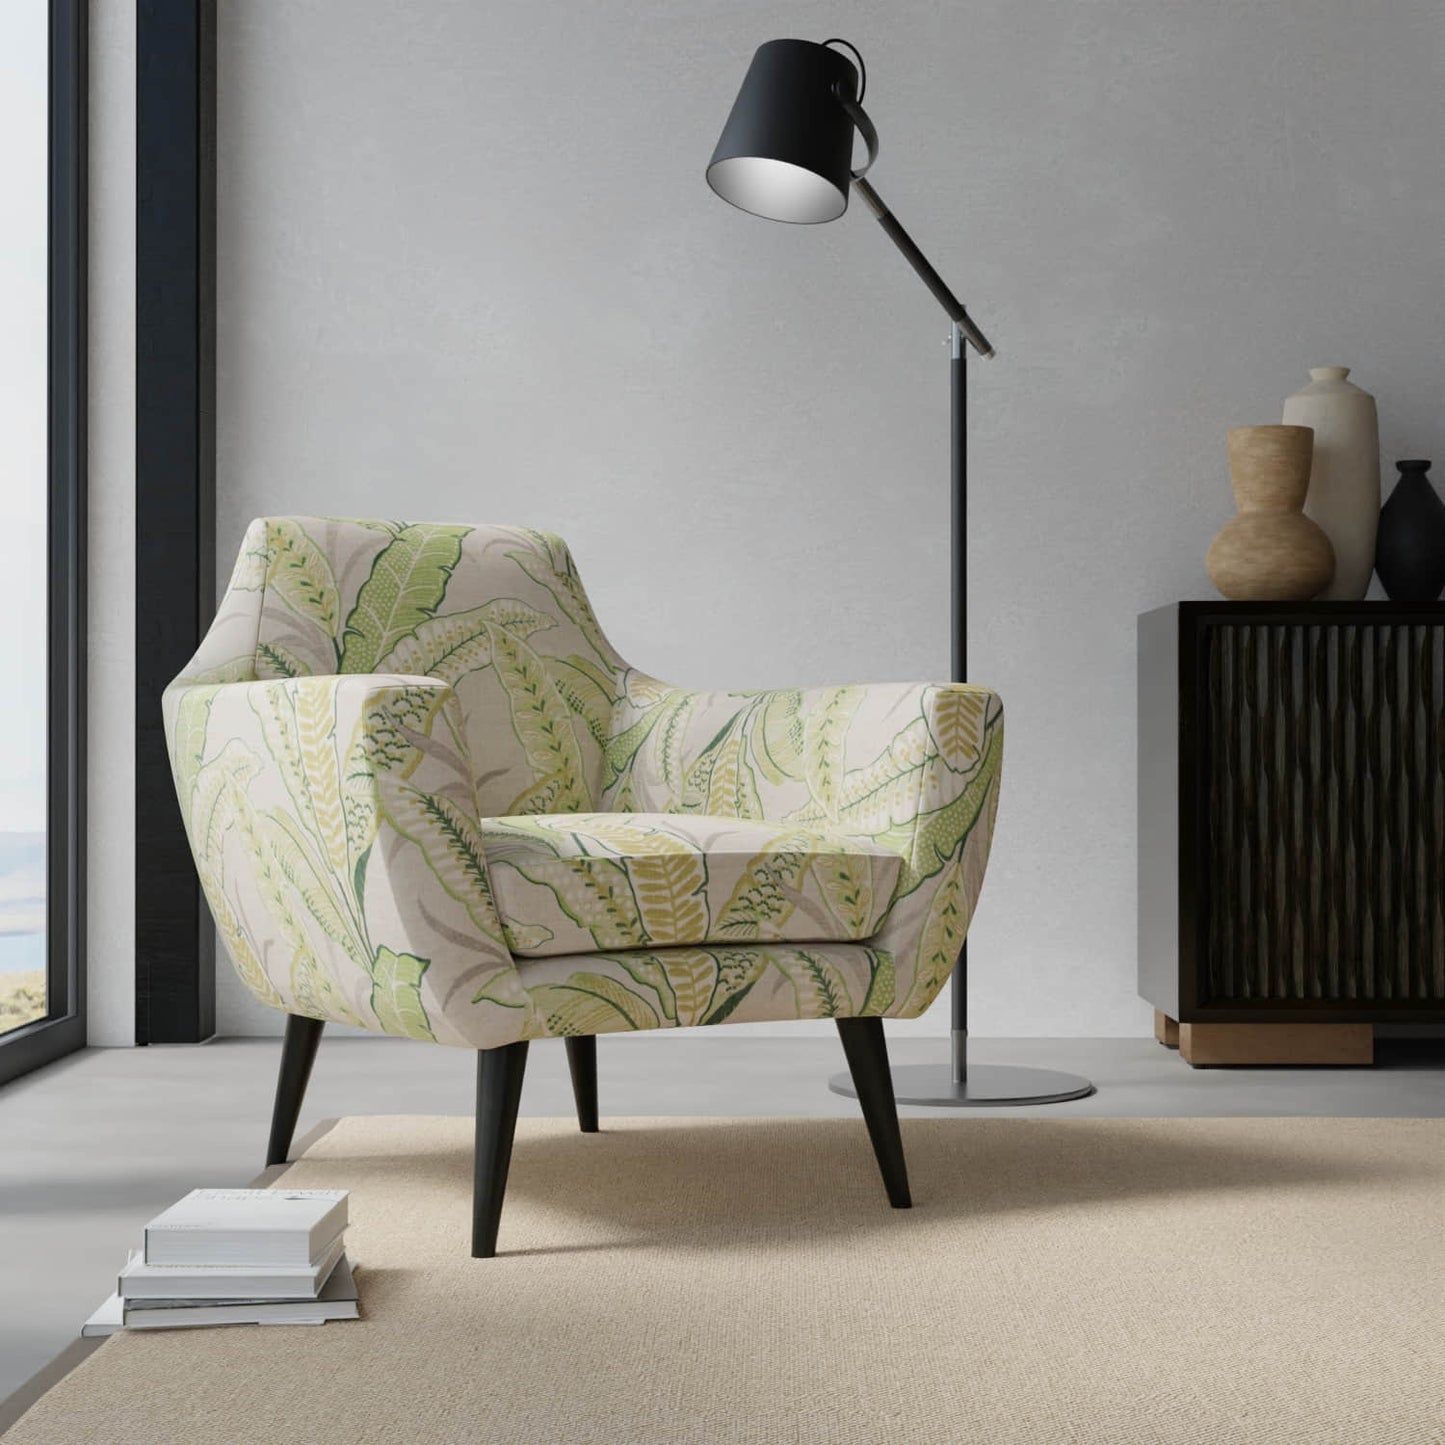 Berkley Leaf upholstered on a contemporary chair